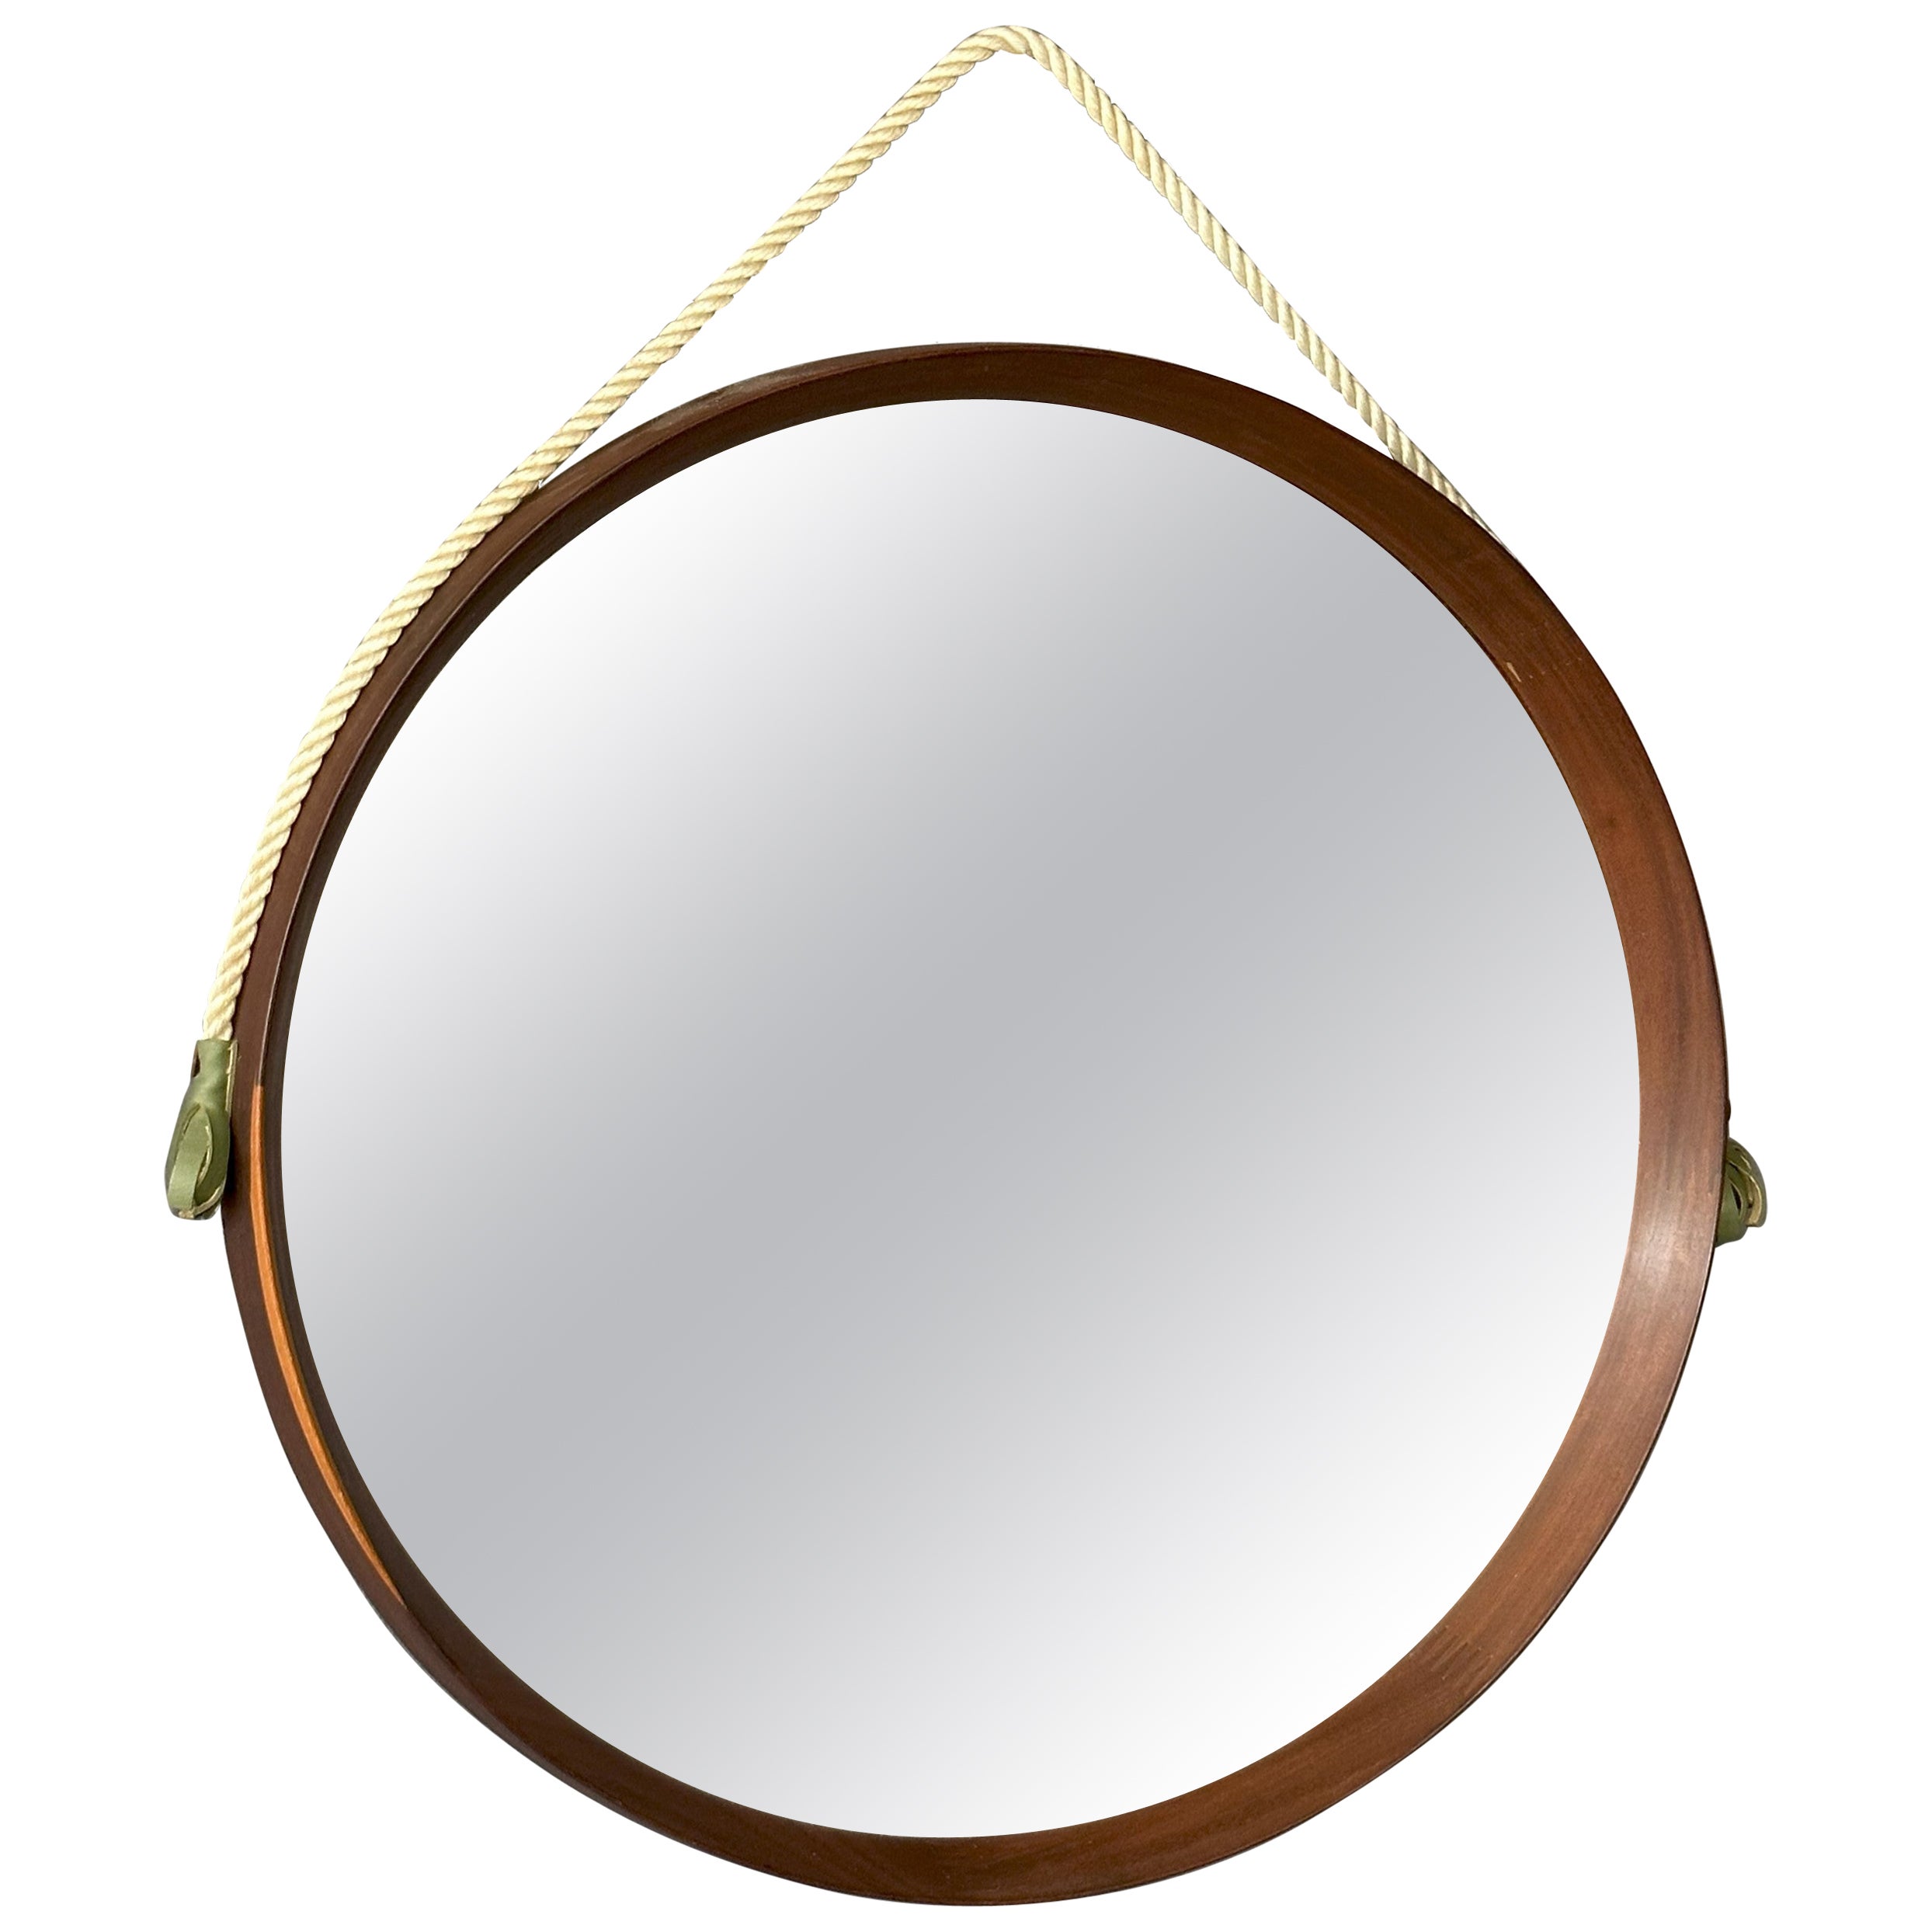 Round mirror with teak frame, 1960s, Italian manufacture, with hanging rope For Sale